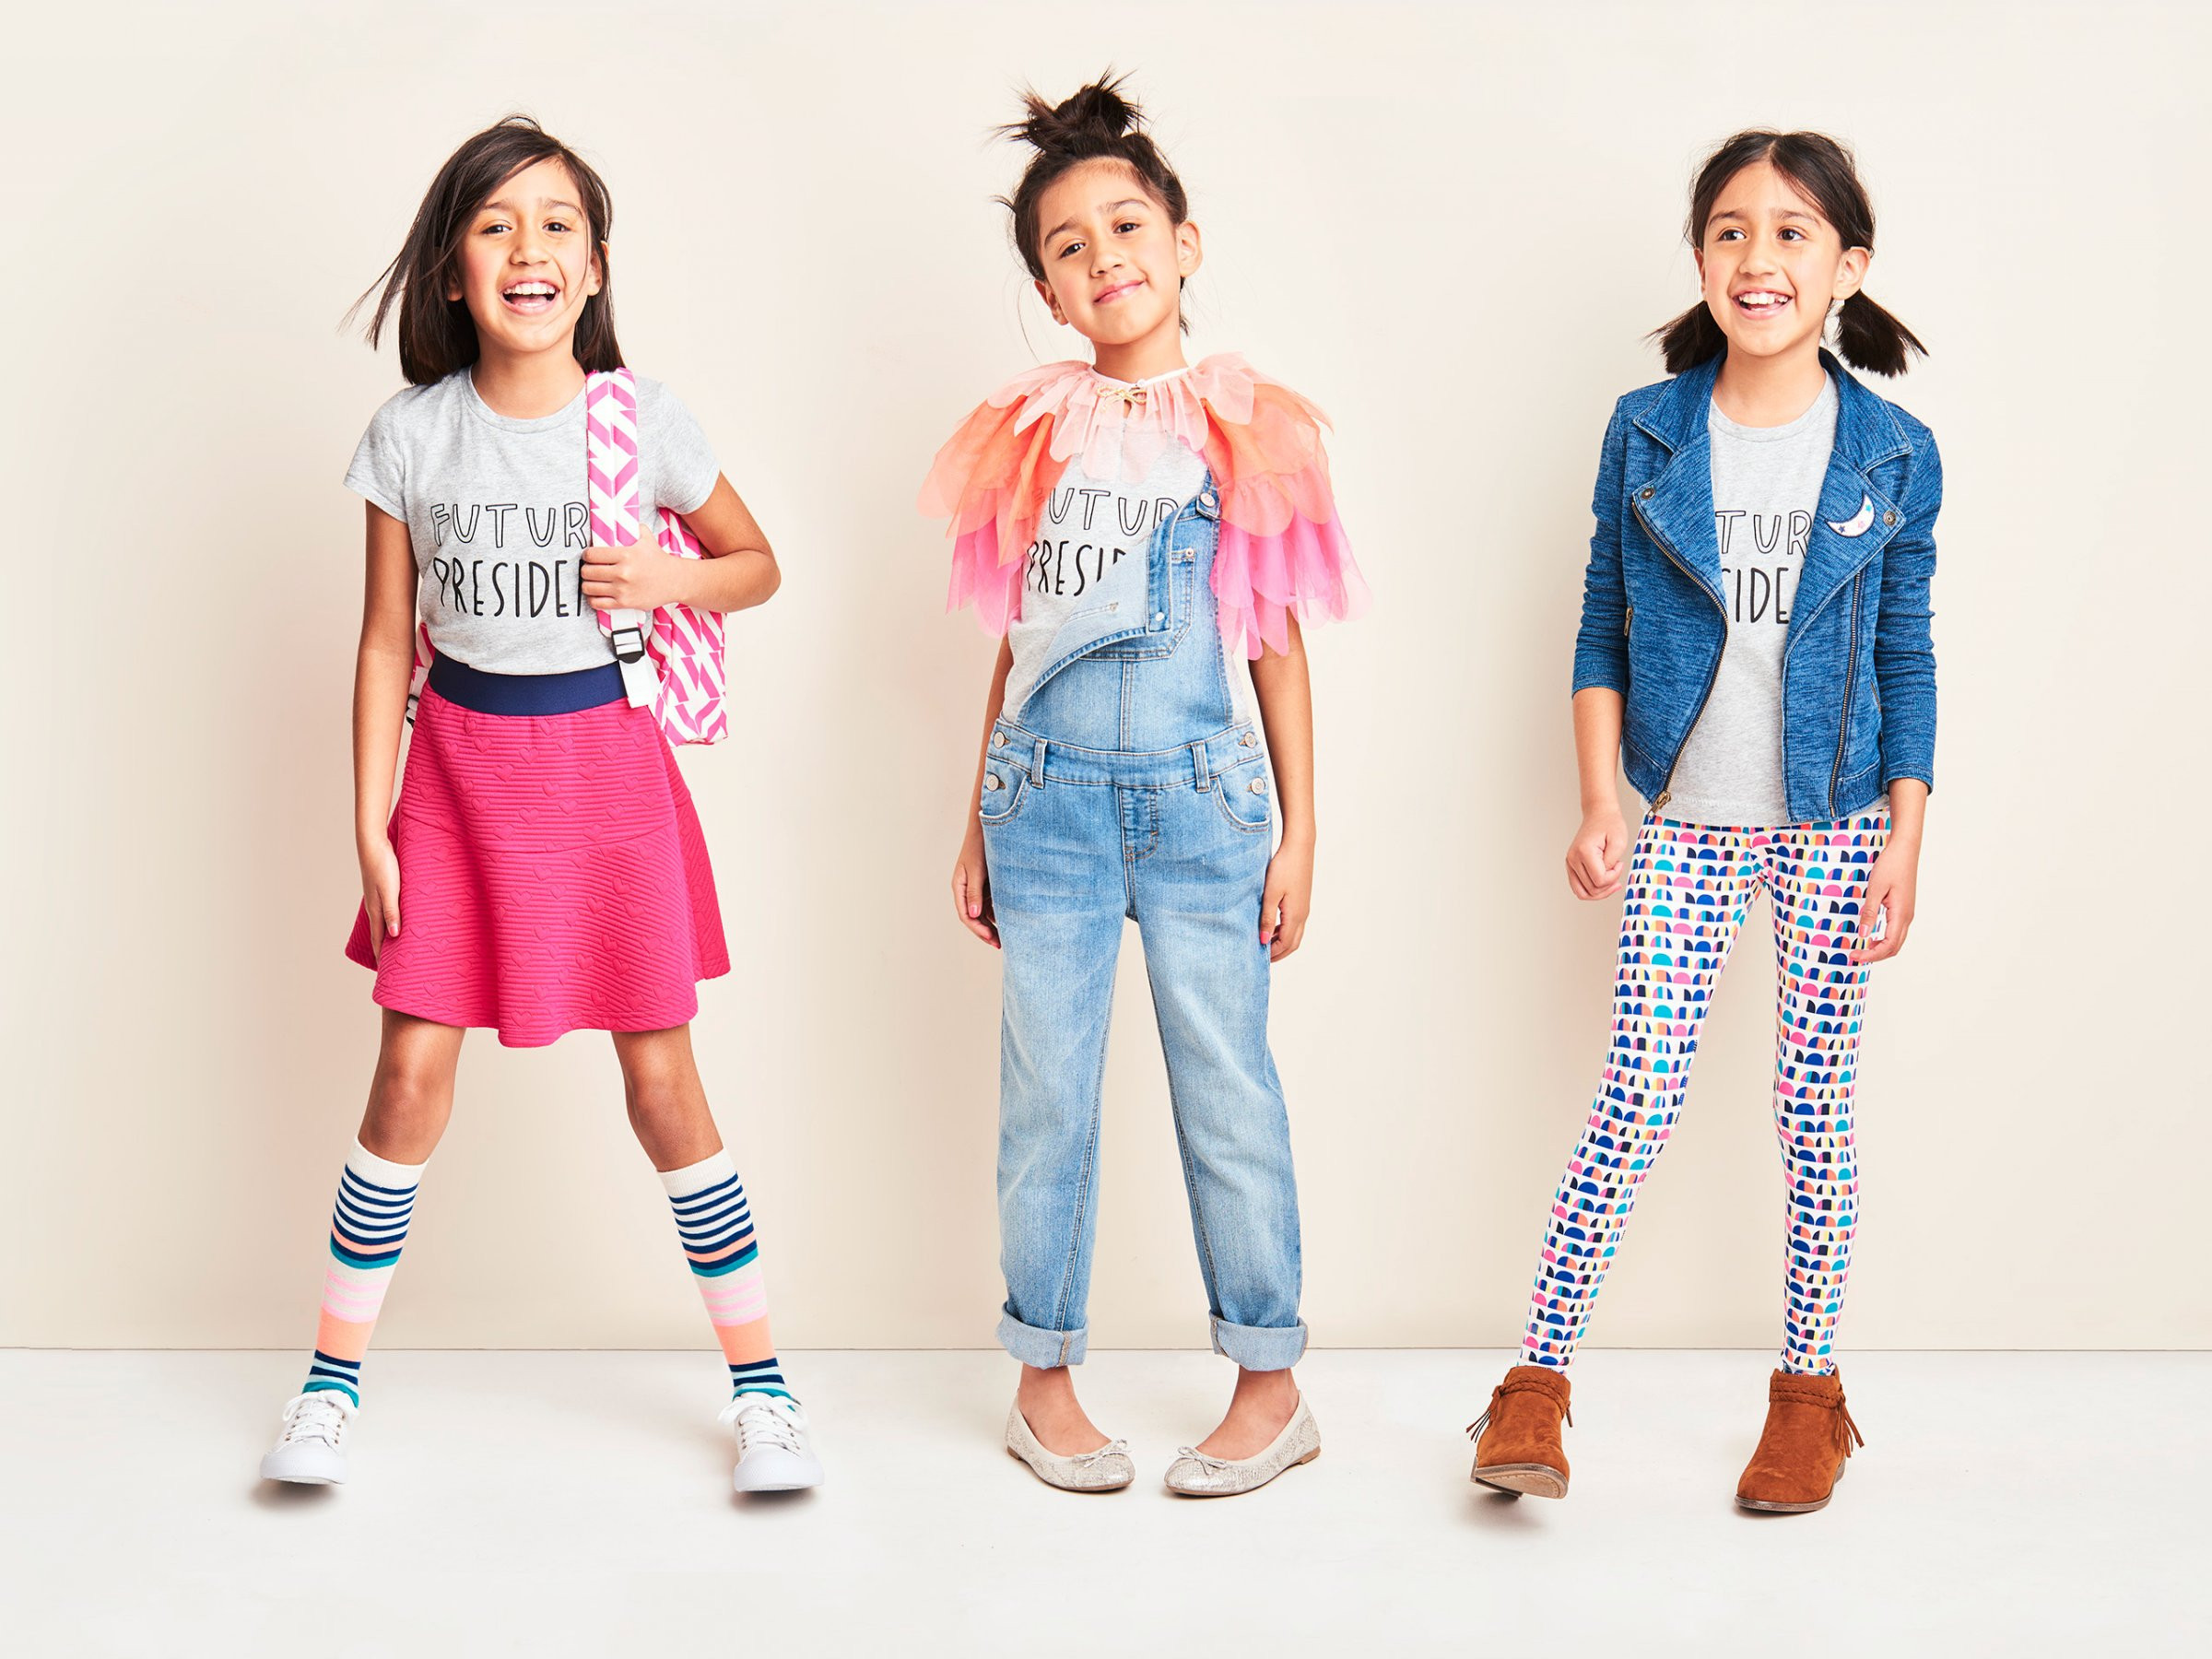 Fashion Clothes Kids
 Today in awesome Tar debuts new kids clothing line